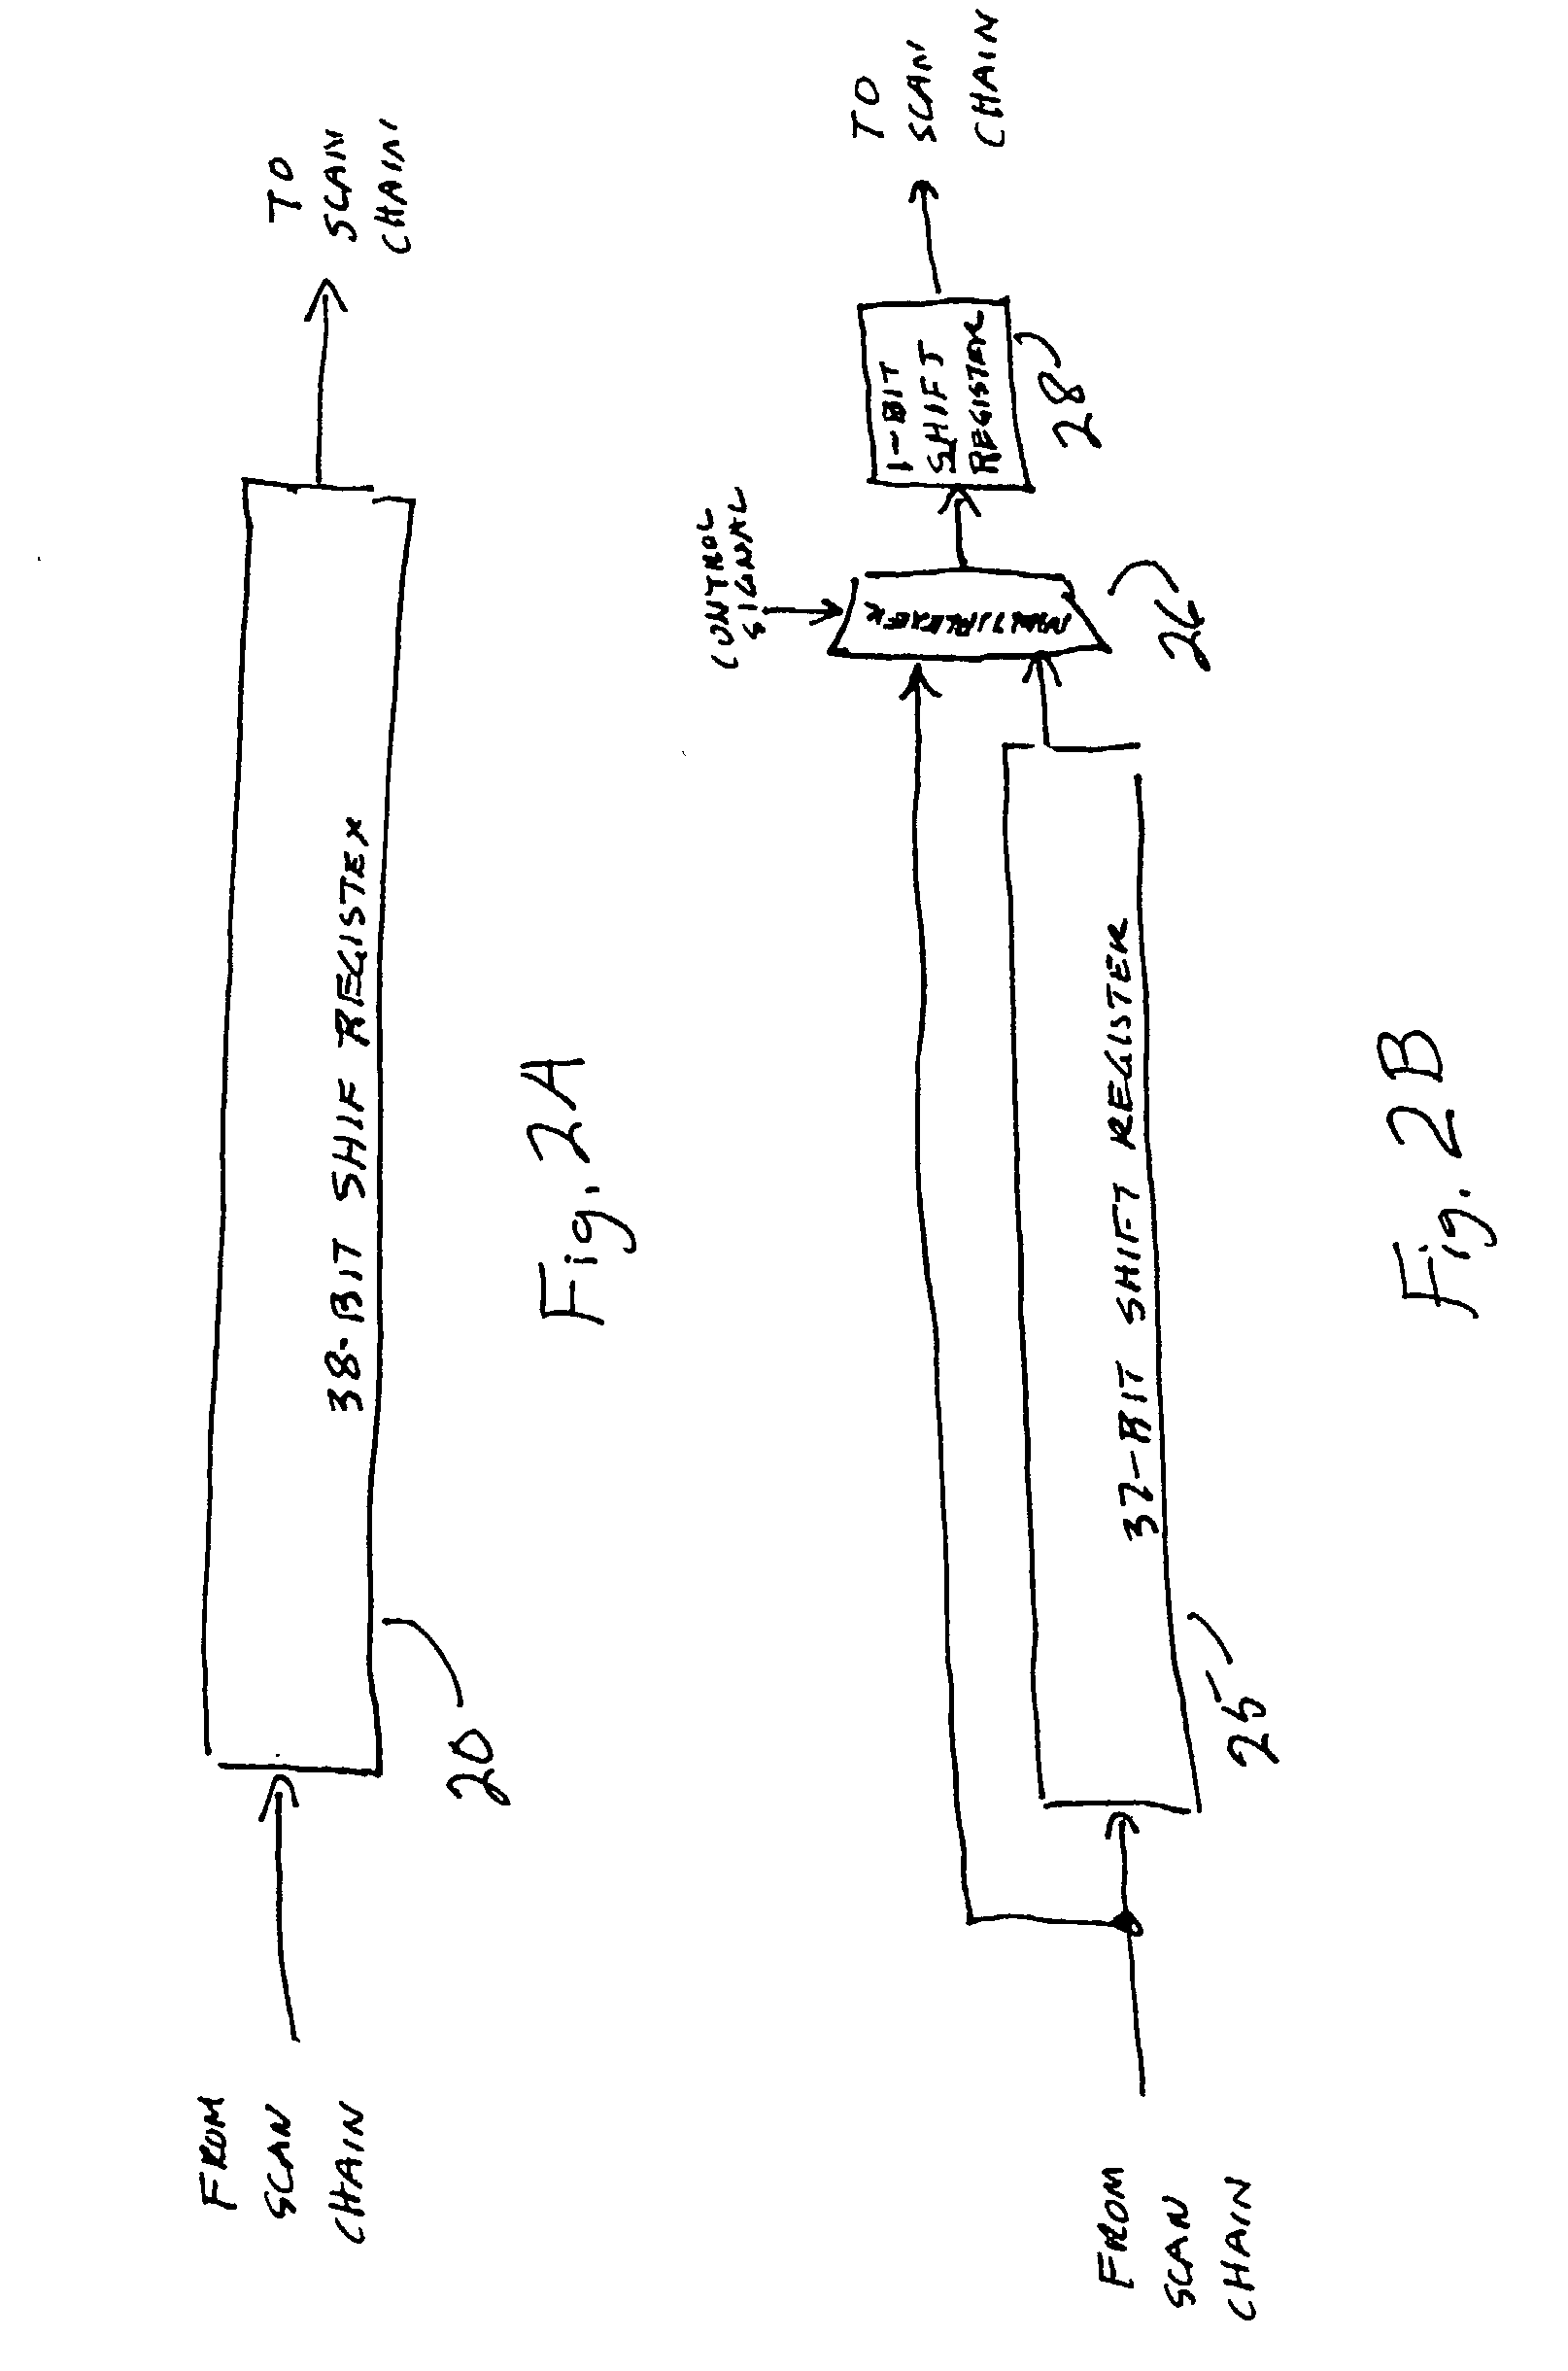 Apparatus and method for device selective scans in data streaming test environment for a processing unit having multiple cores